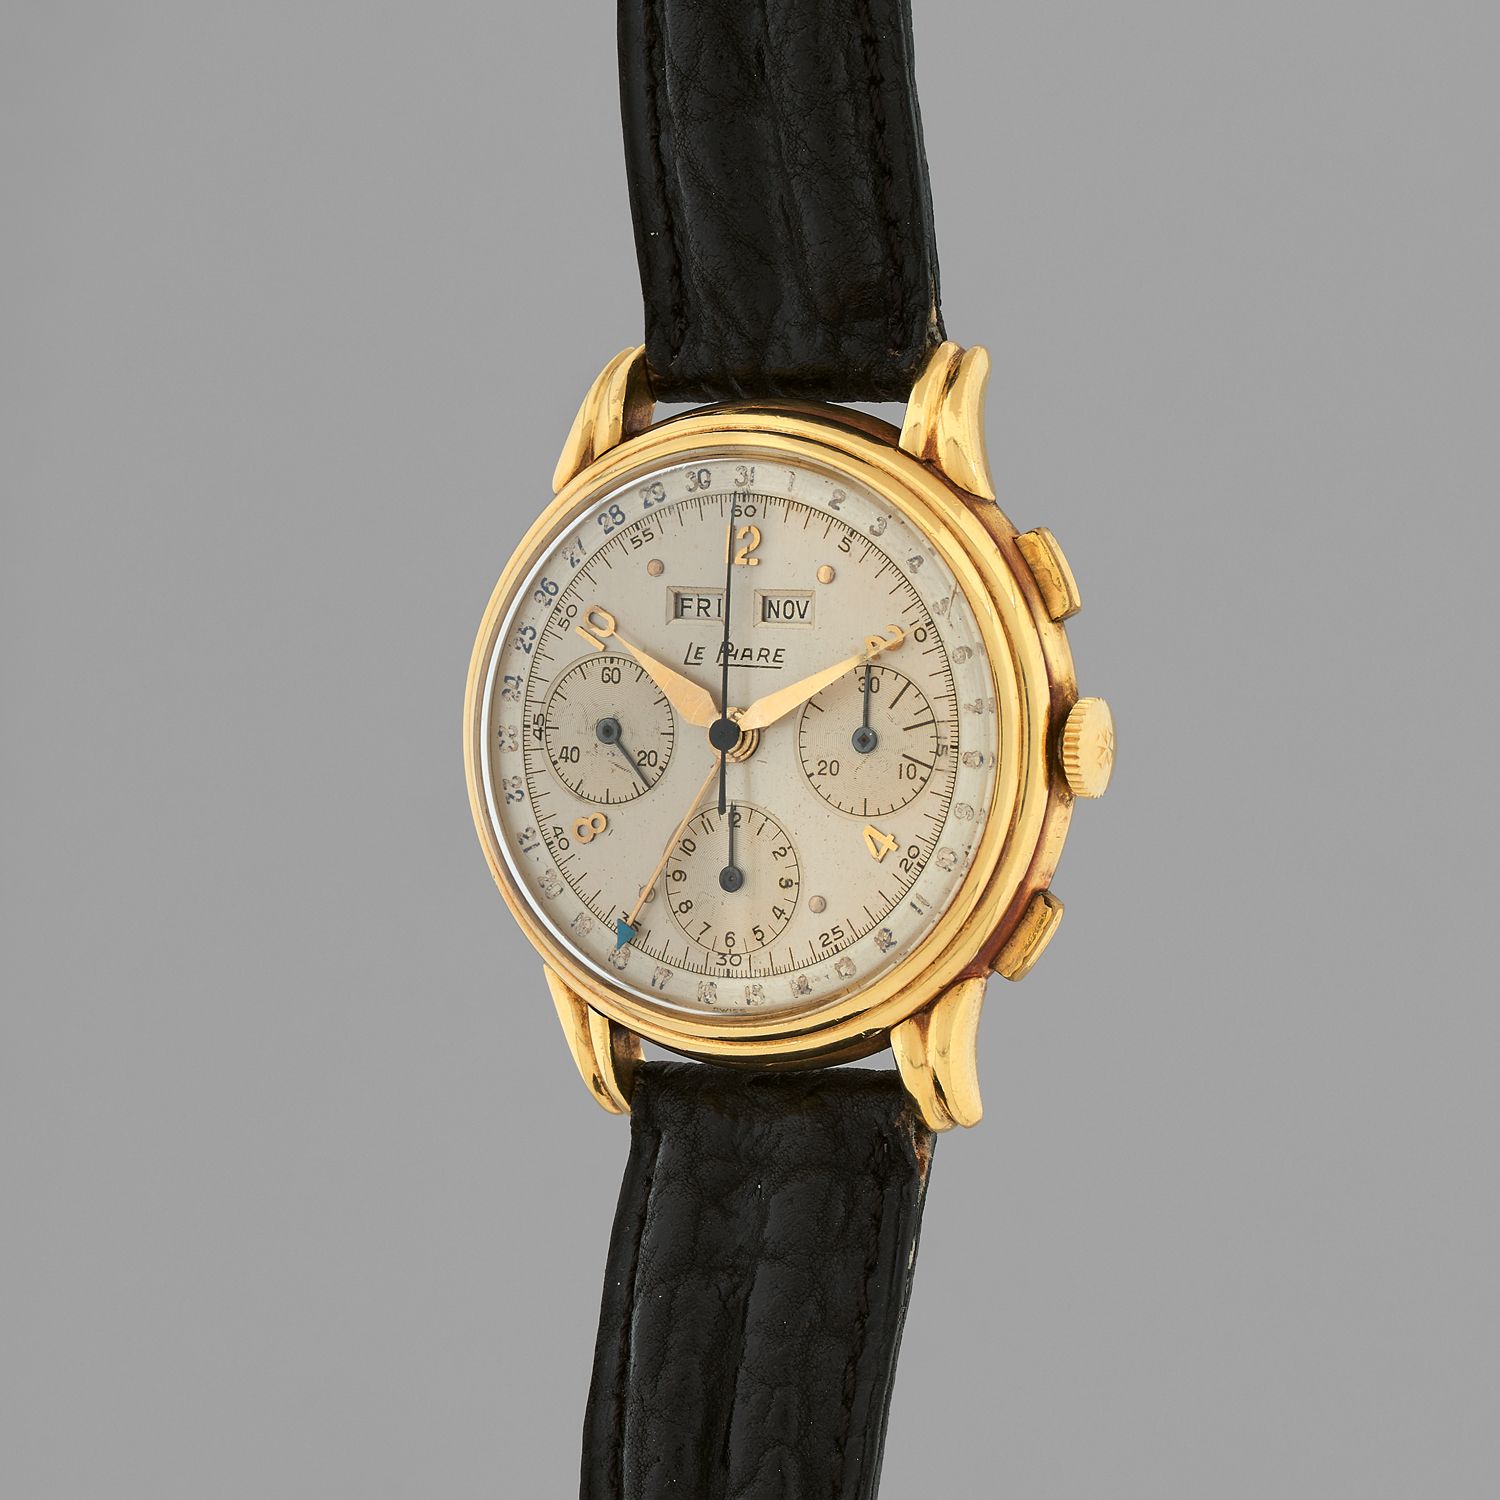 Null LE PHARE
Triple date chronograph.
Circa: 1950.
Case in yellow gold 750/1000&hellip;